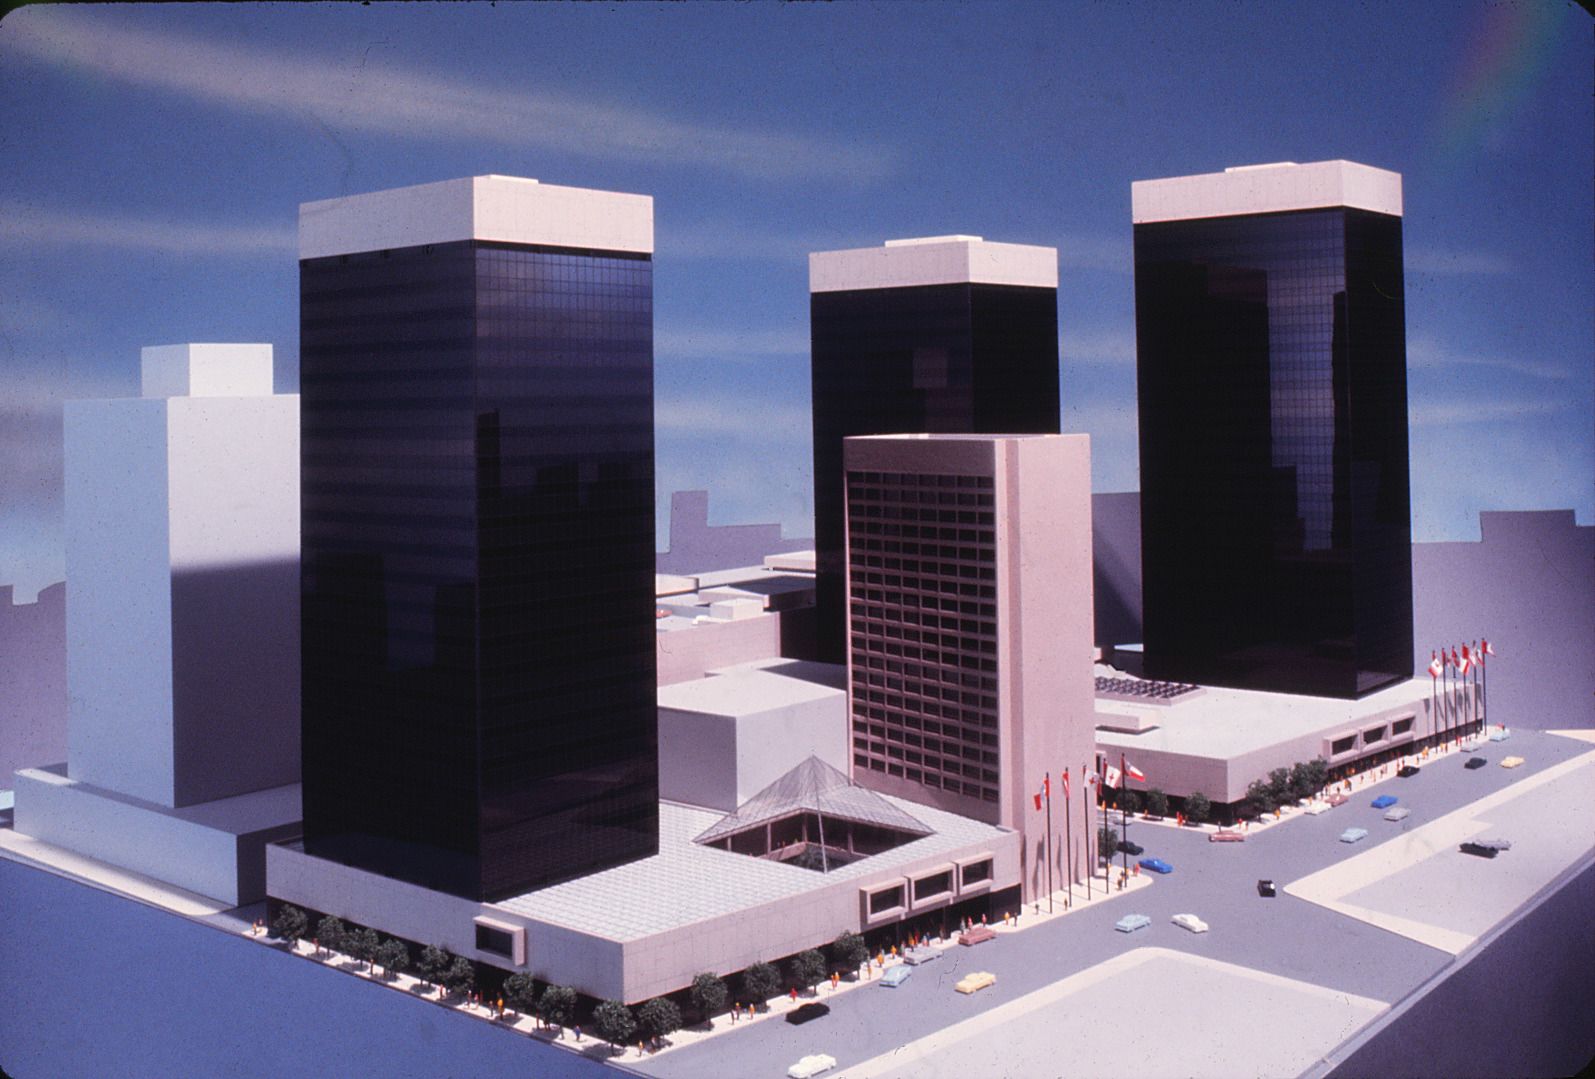 Scale model rendition of what the building arrangement at Edmonton Center will look like.